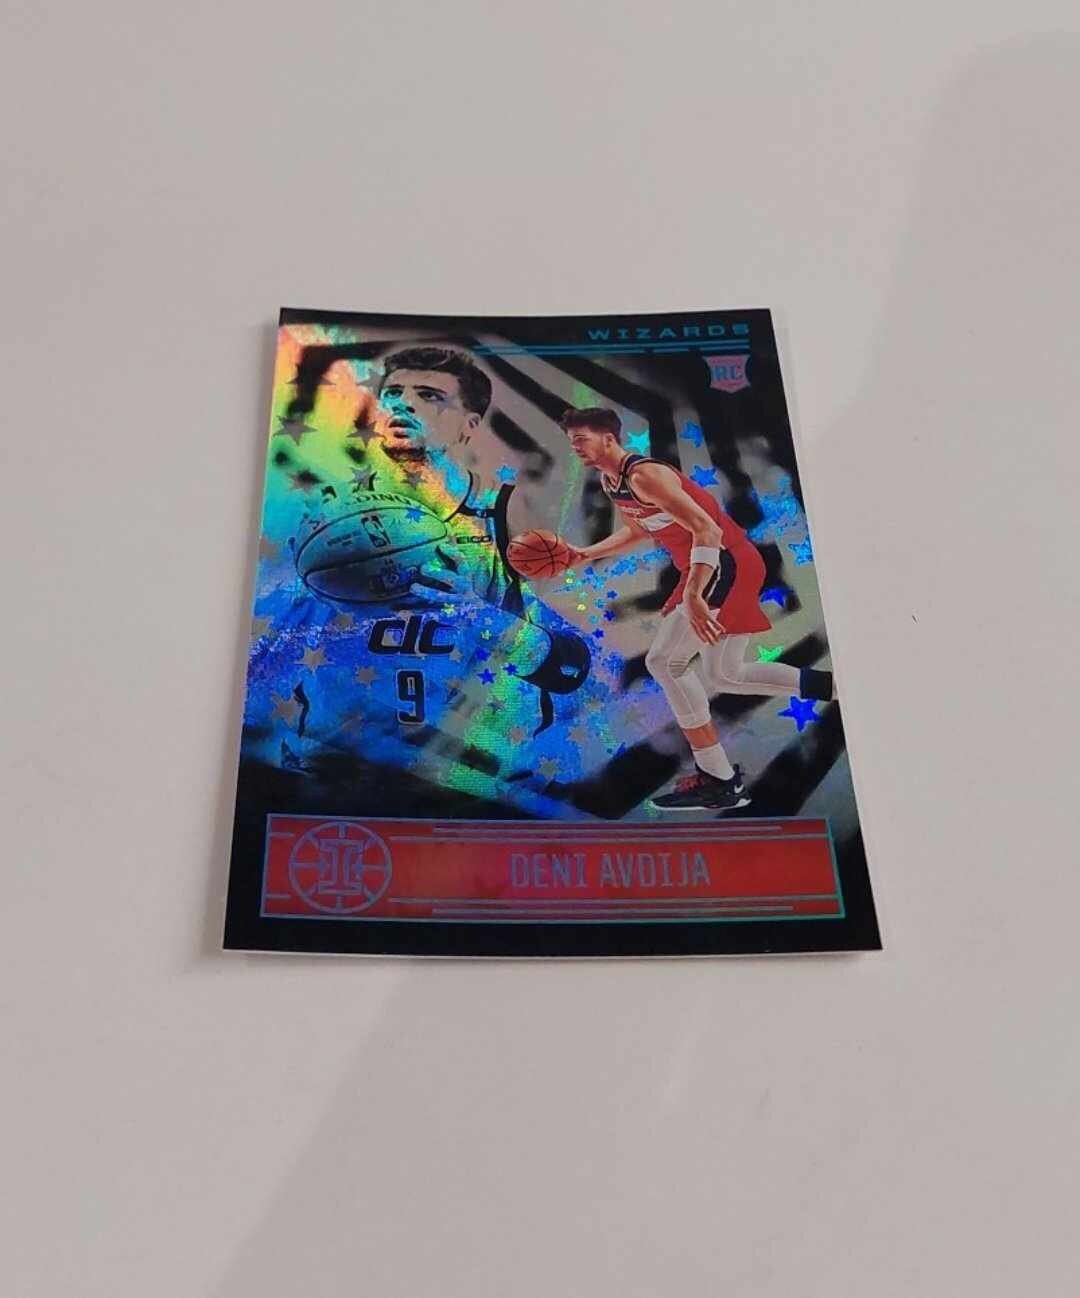 Kelly Oubre Jr 2020-21 Panini Mosaic #128 Silver Prizm Golden State Warriors